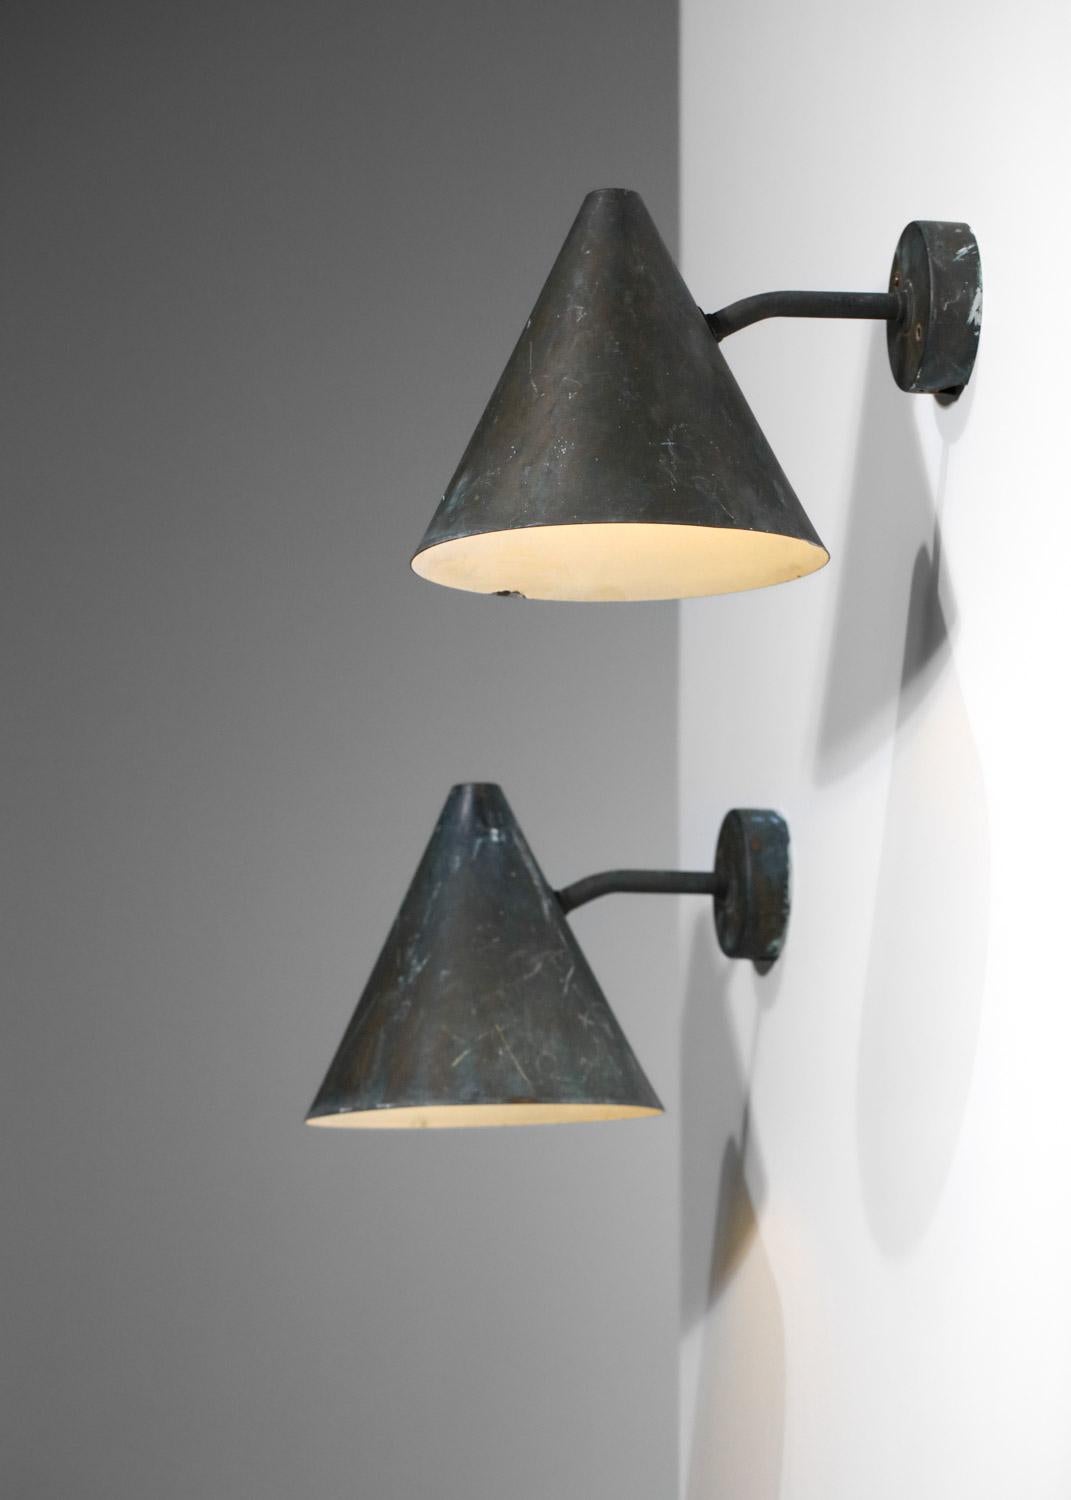 Pair of Scandinavian wall sconces by the famous Swedish designer Hans Agne Jakobsson. Model 